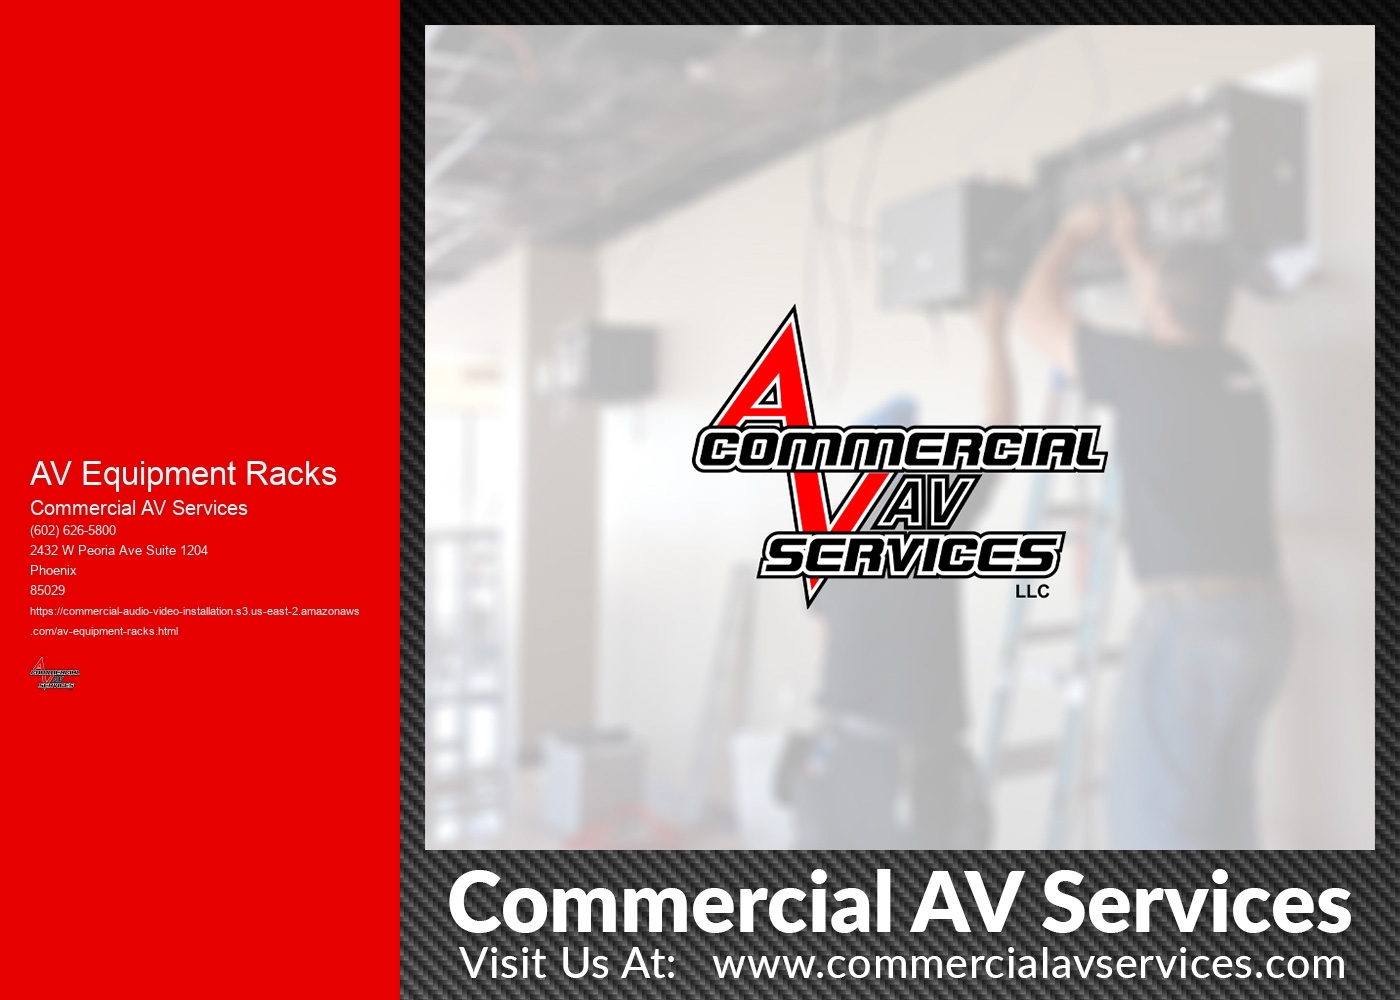 How can AV equipment racks contribute to the overall efficiency and performance of an audiovisual system?